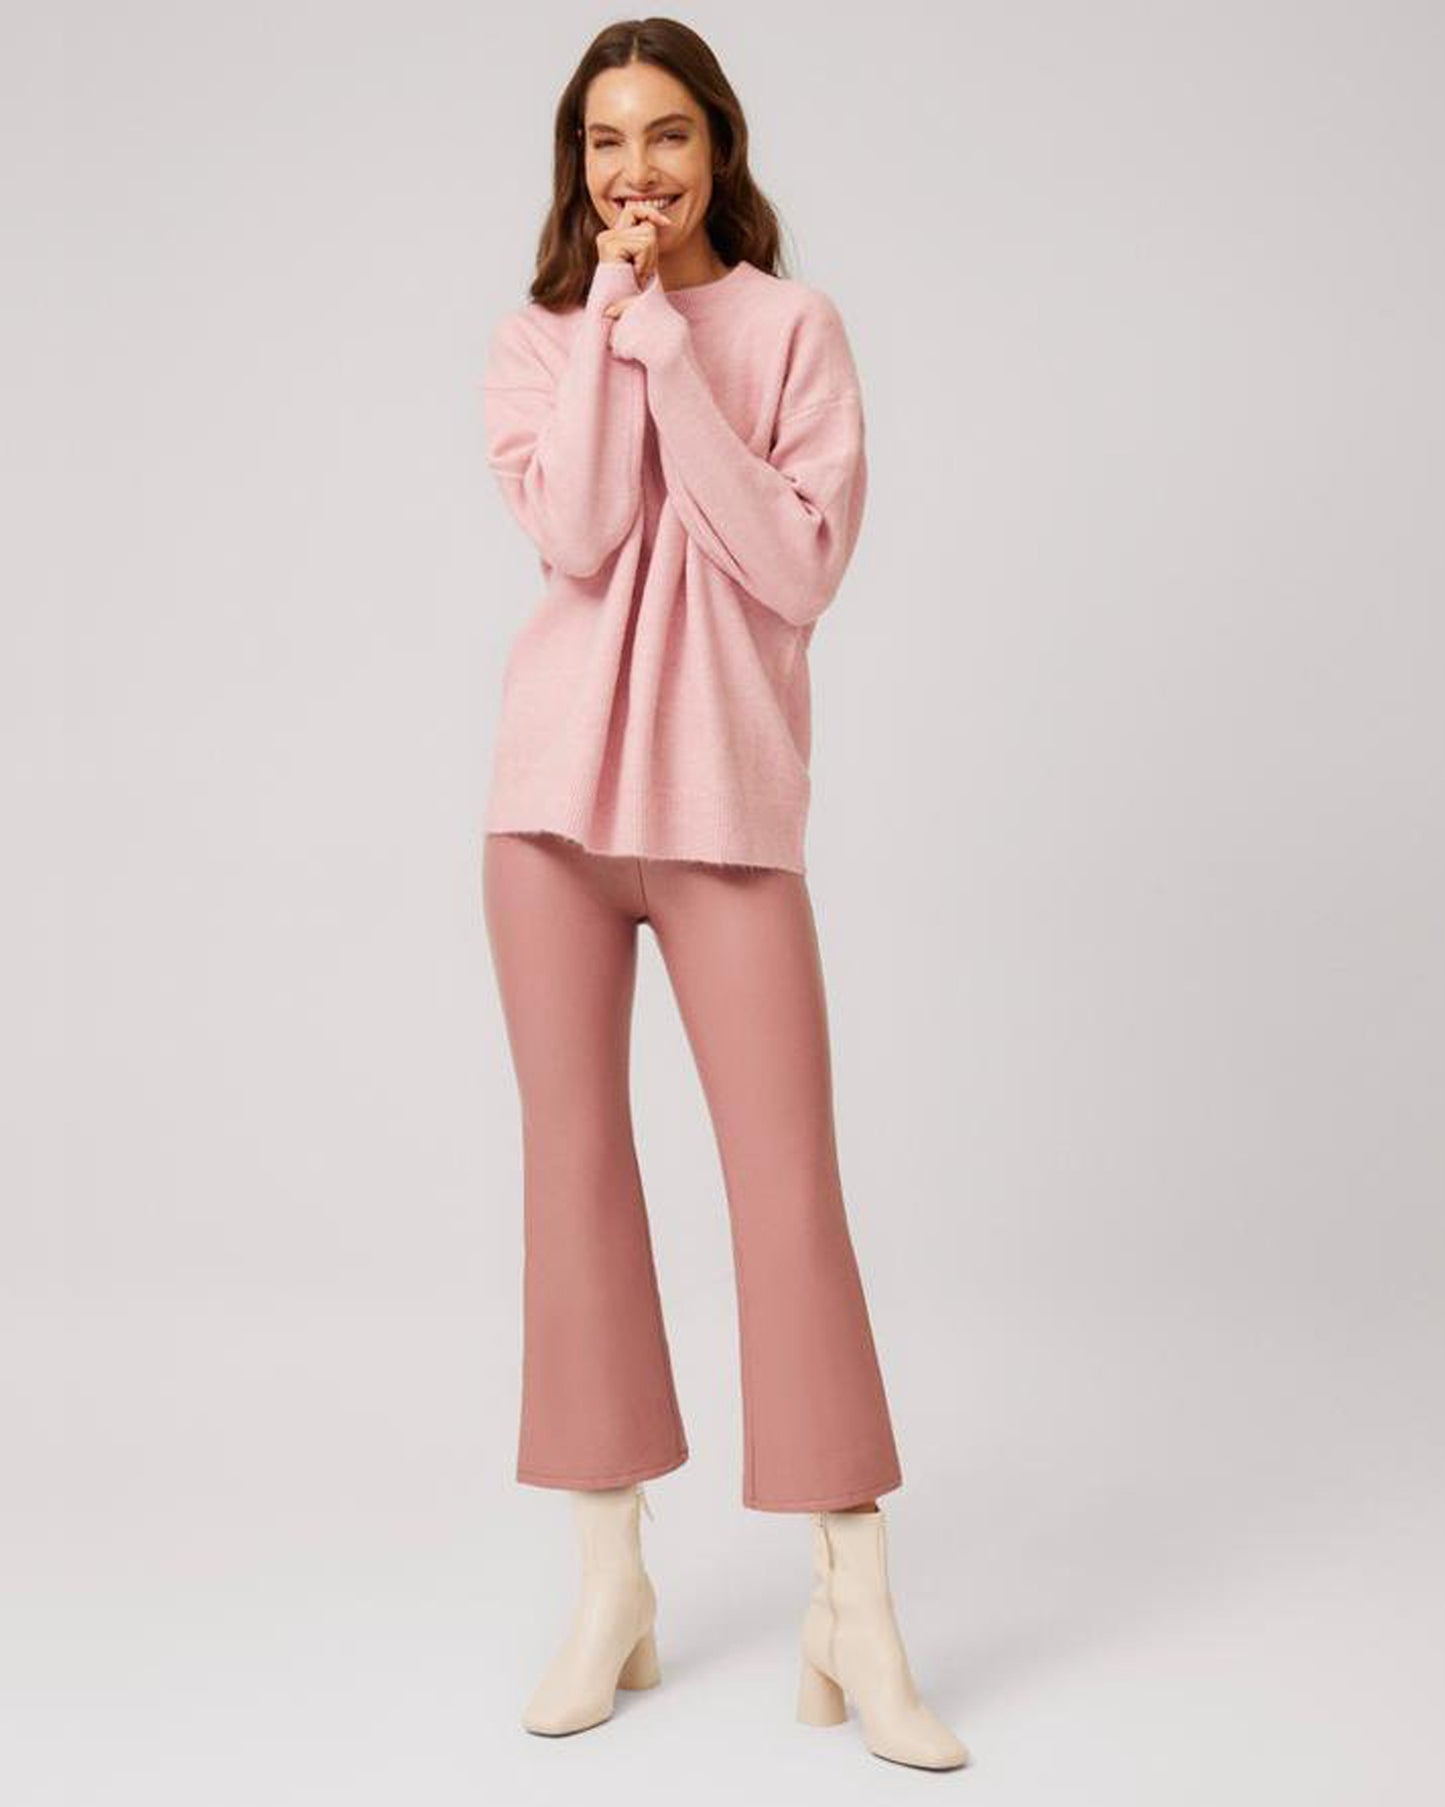 Ysabel Mora 70296 Faux Leather Cropped Pants - Pale dirty pink flared crop faux leather thermal leggings with a soft and warm plush lining. Worn with a light dusty pink knitted jumper and cream block heeled ankle boots.